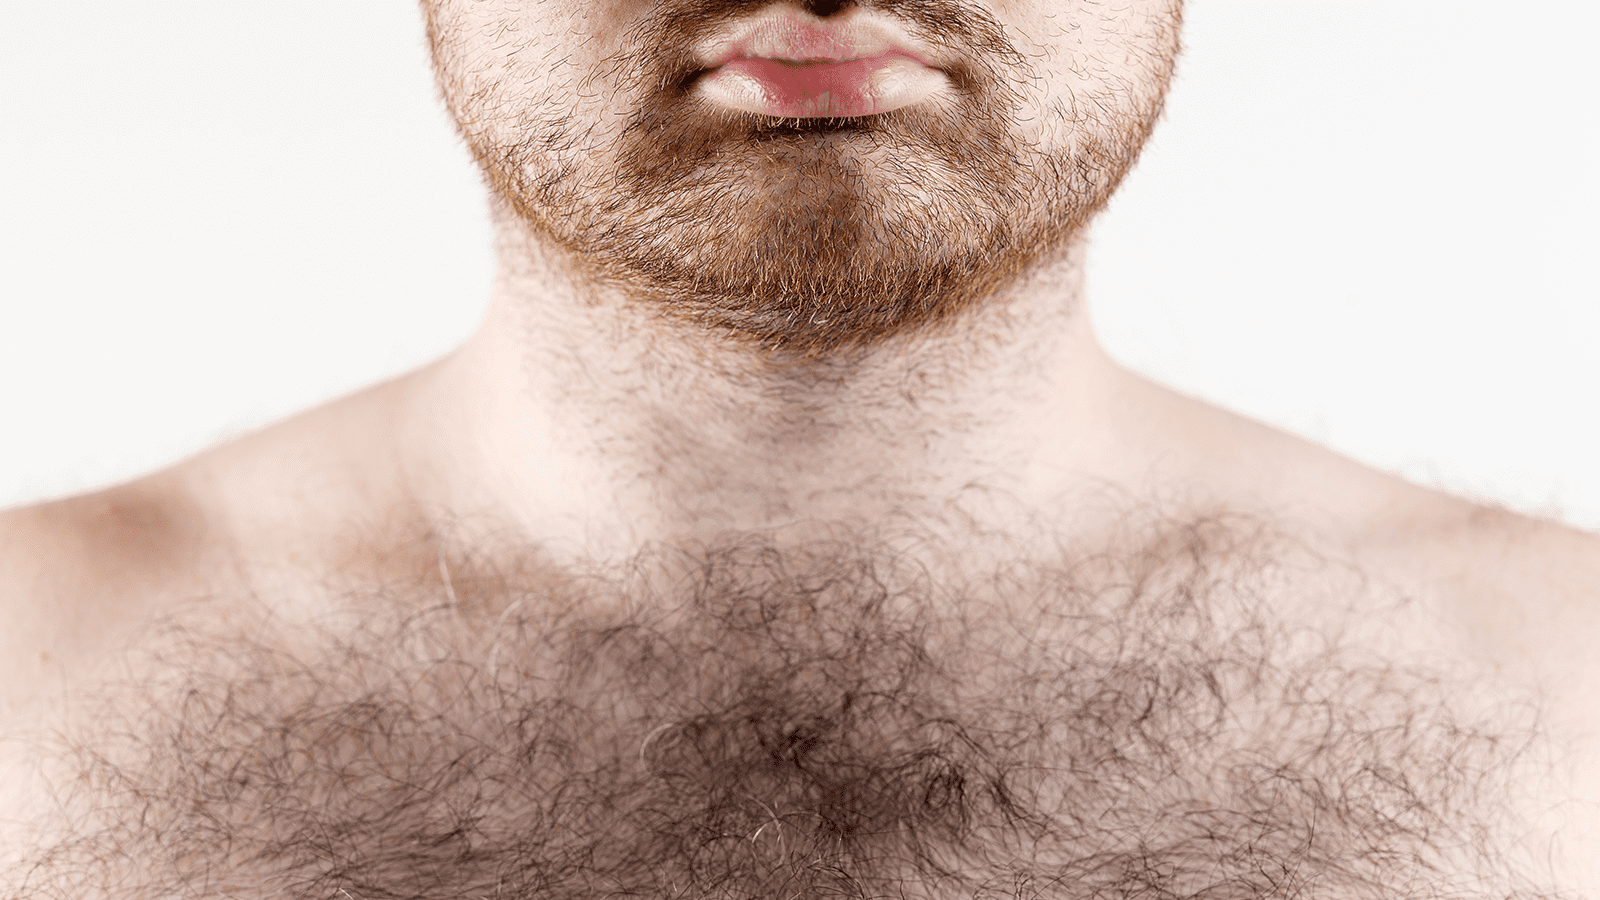 7 Things Your Body Hair Says About Your Health